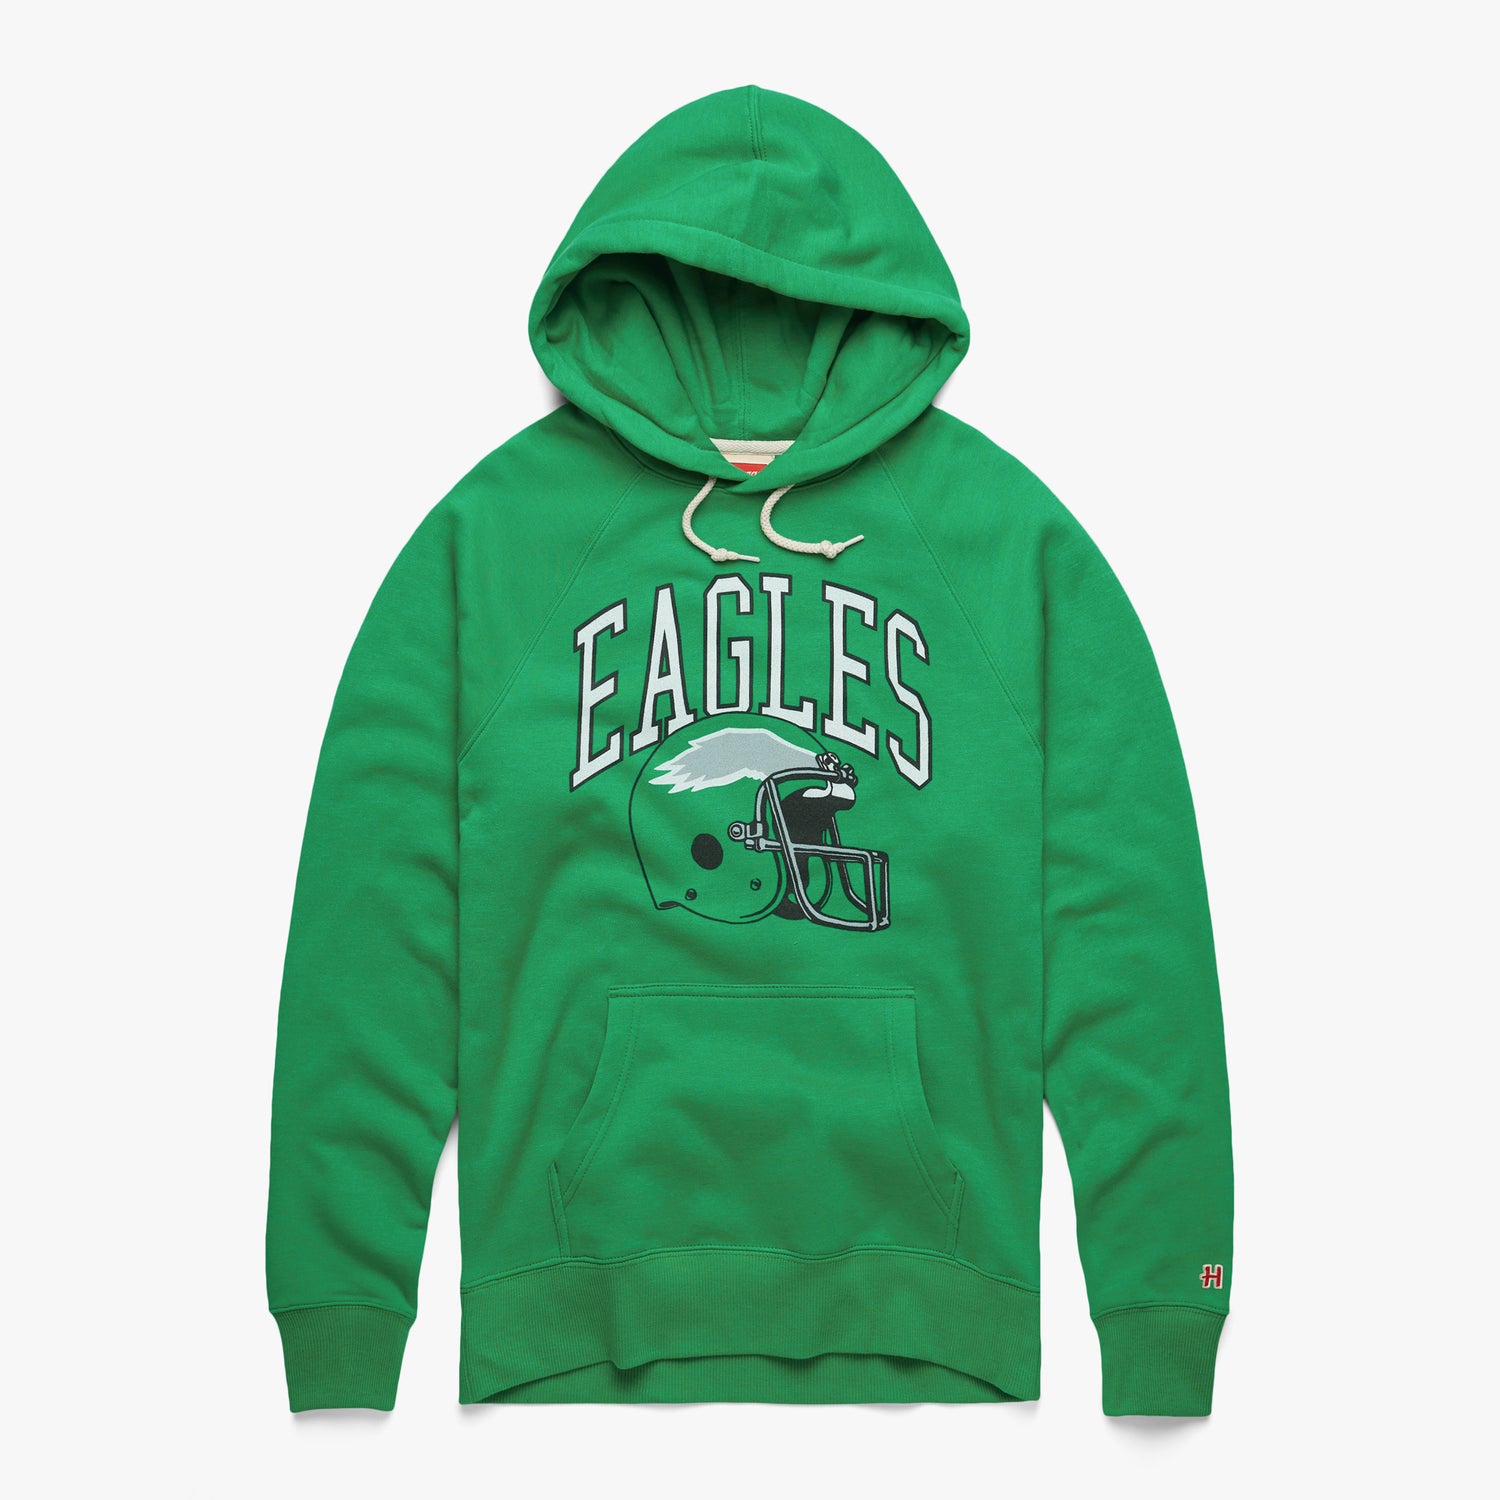 Best places in Philly to get Eagles Super Bowl jerseys, hoodies